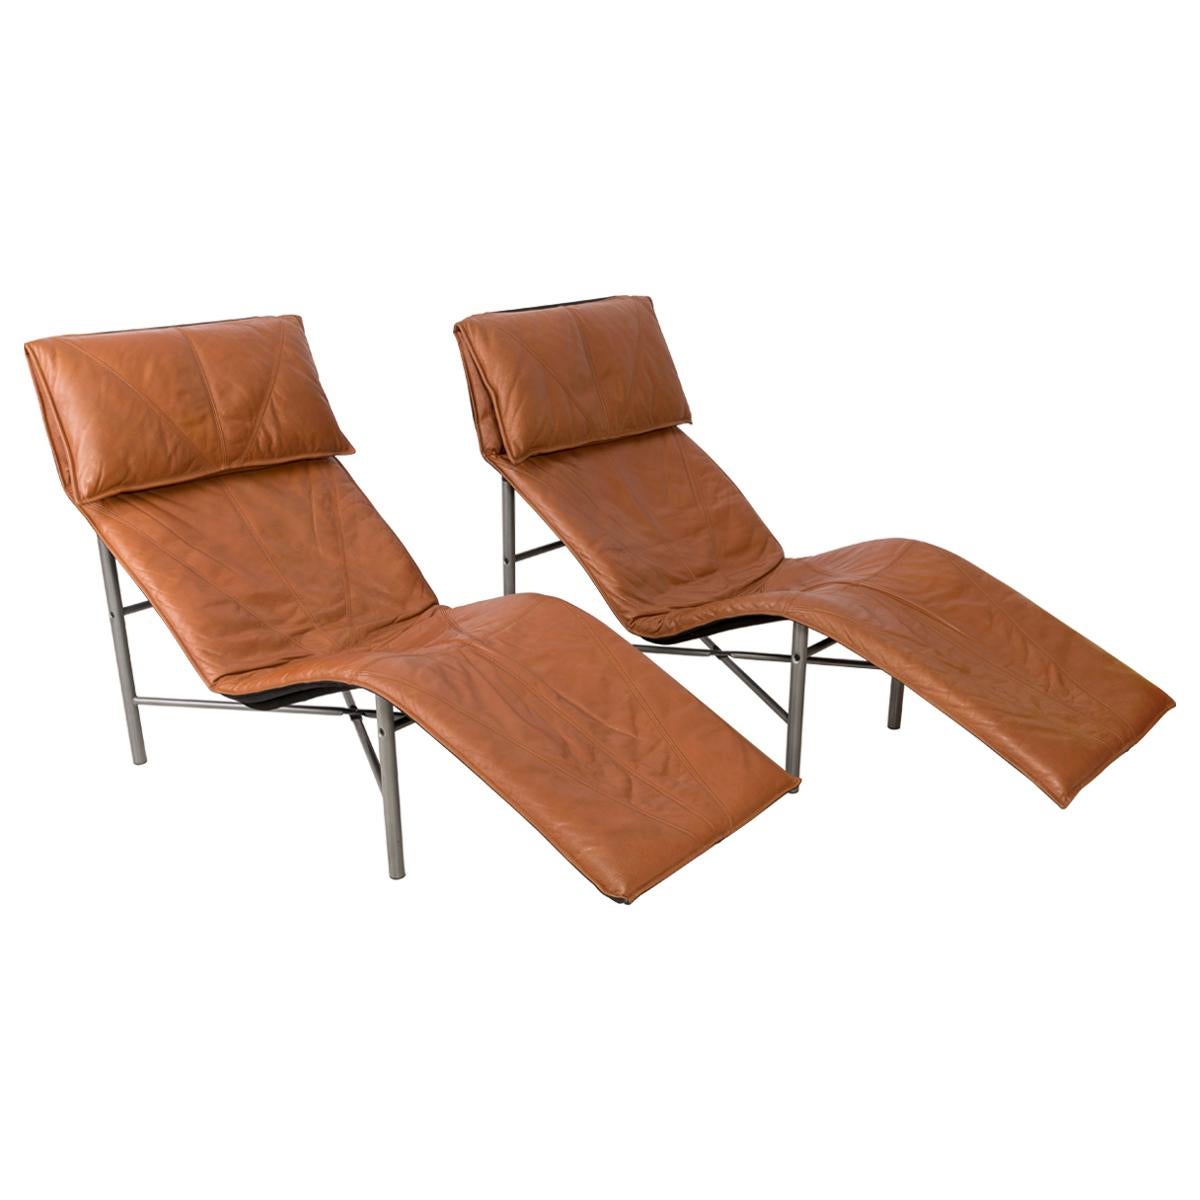 Two Midcentury Danish Modern Leather Chaise Lounge Chairs, Tord Björklund,  1980 For Sale at 1stDibs | danish chaise lounge